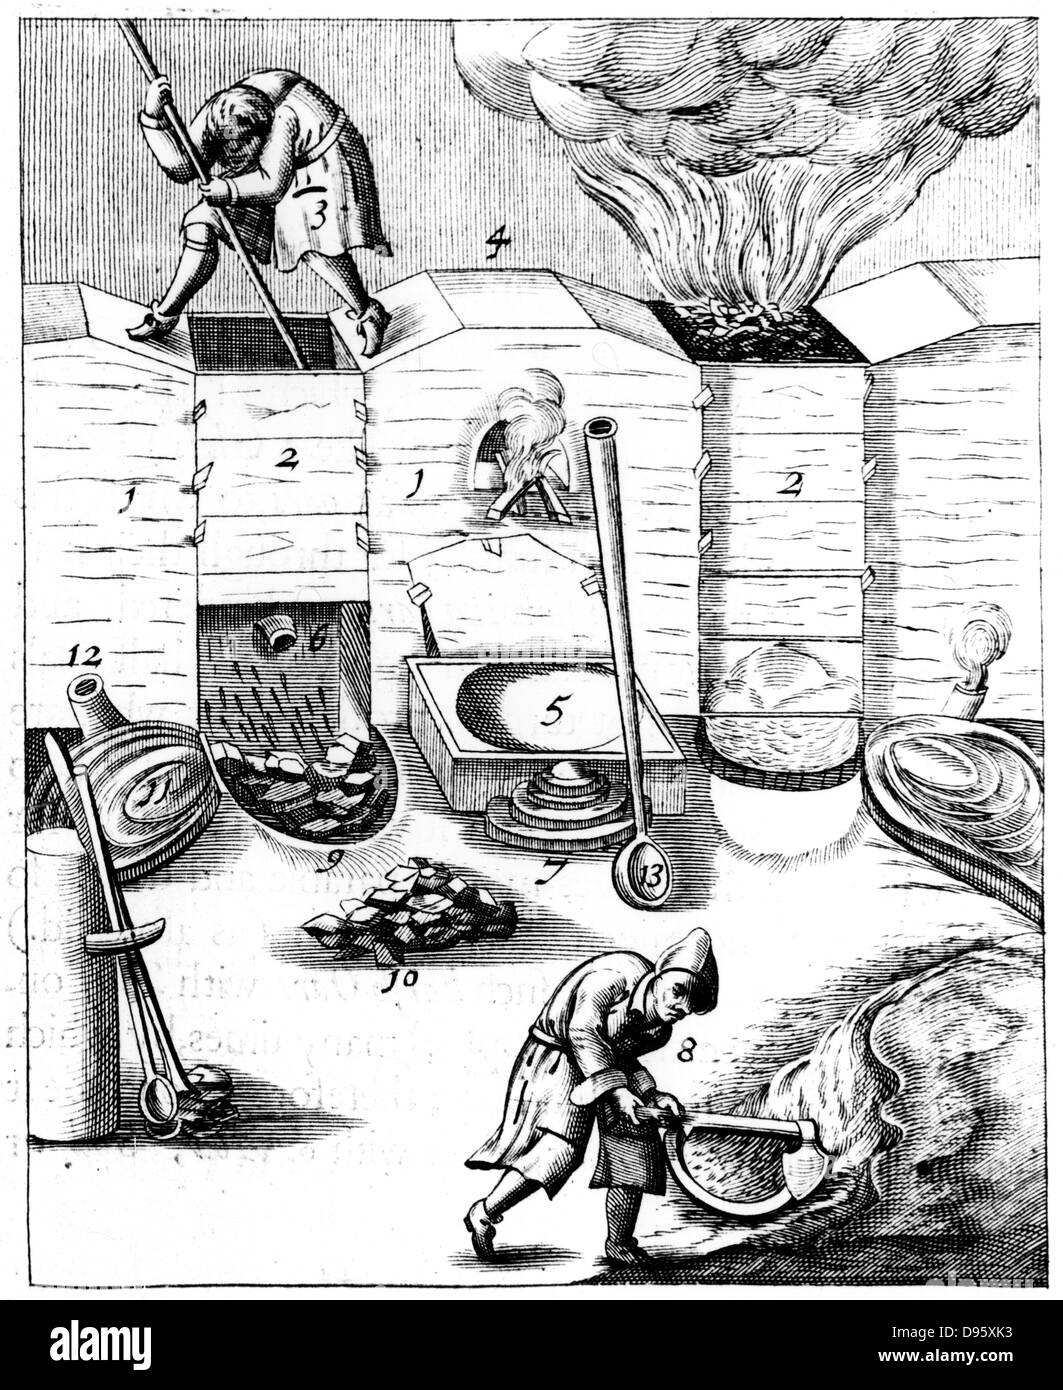 Blast furnaces. From 1683 English edition of Lazarus Ercker 'Beschreibung allerfurnemisten mineralischen Ertszt' of 1580. Copperplate engraving. New plates with numbers rather than letters, but process faithfully copied. Stock Photo